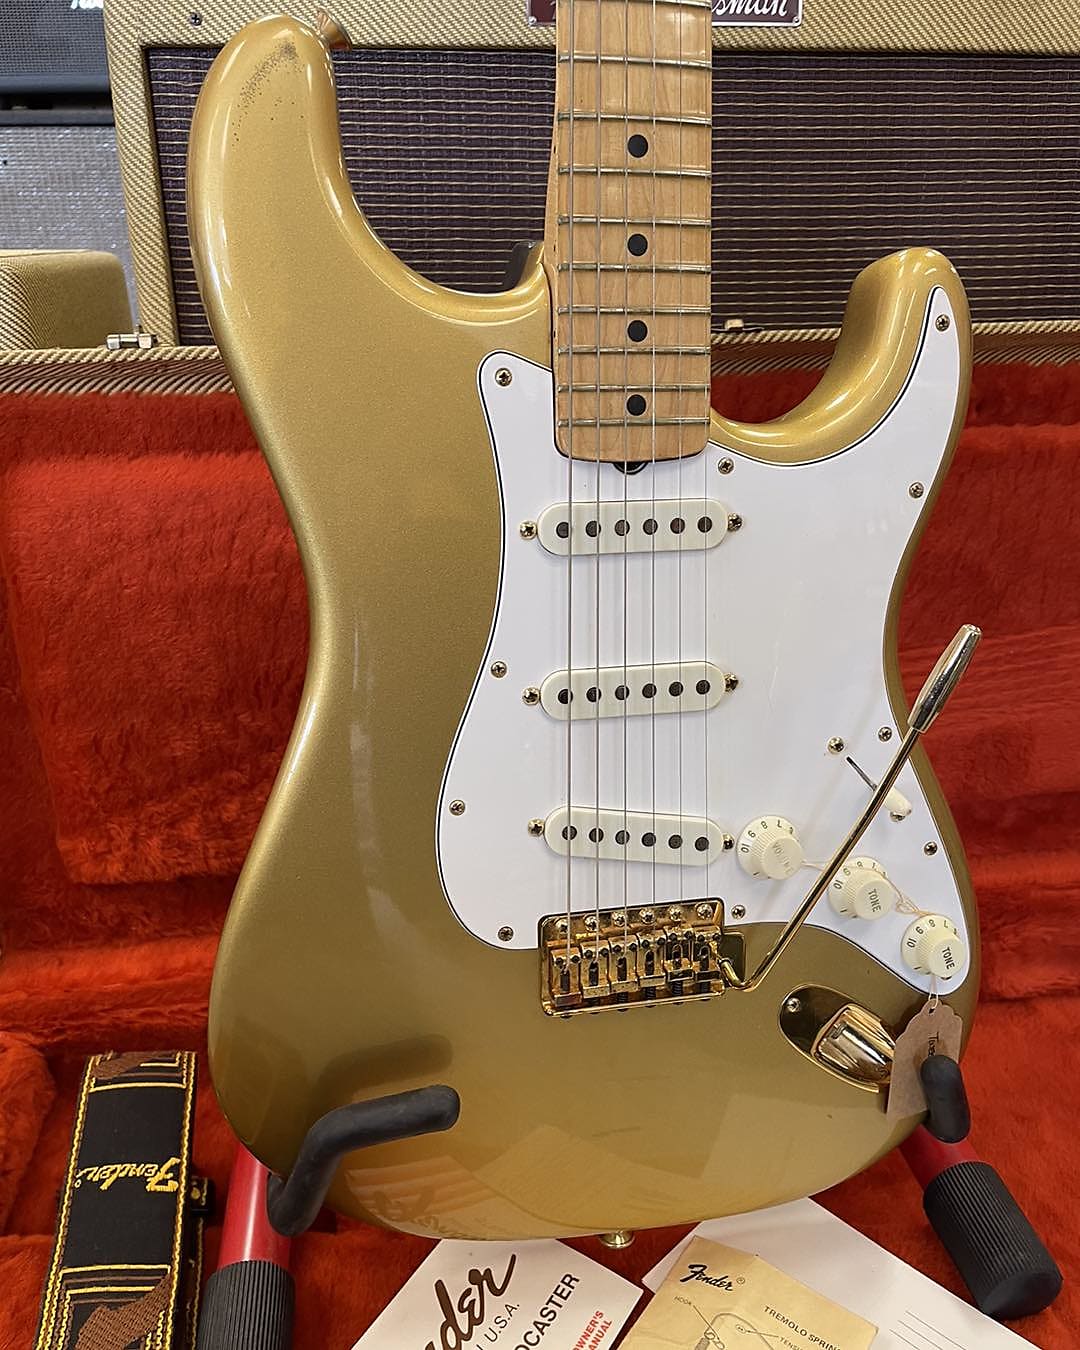 Fender "Dan Smith" Stratocaster with Maple Fretboard 1981 - Aztec Gold - Very Good Condition